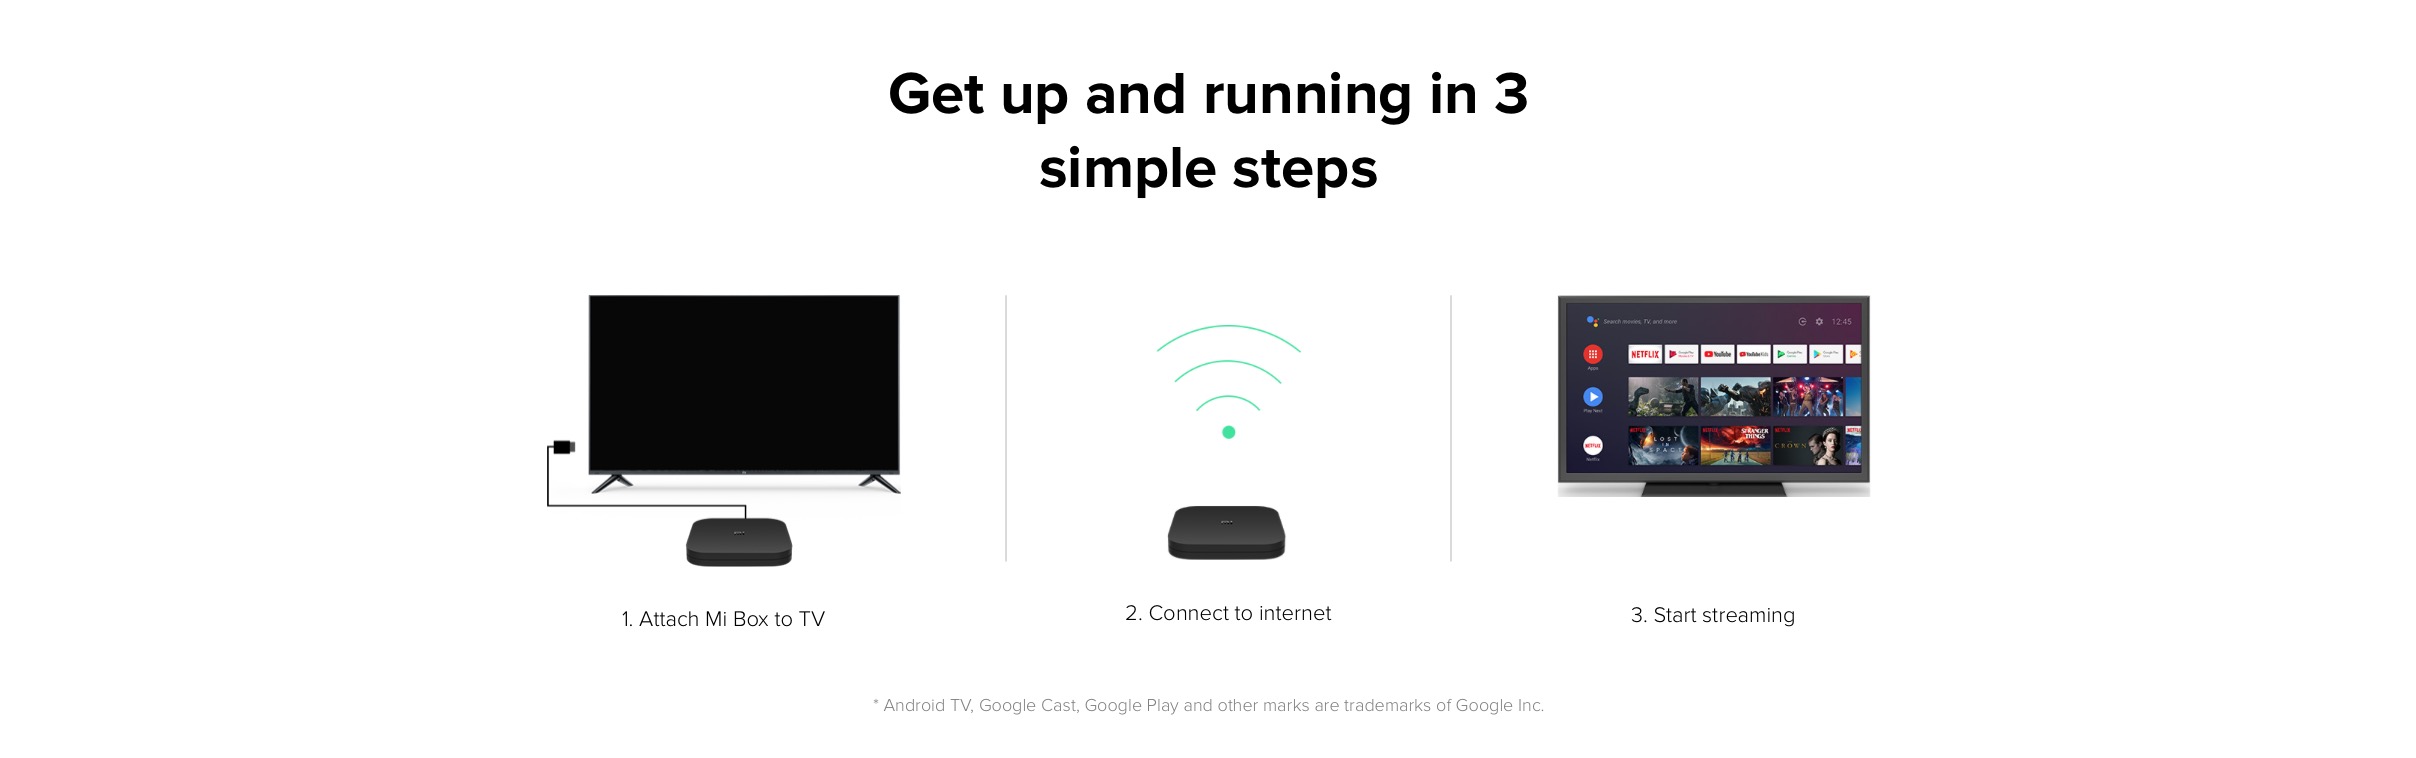 Get up and running in 3 simple steps